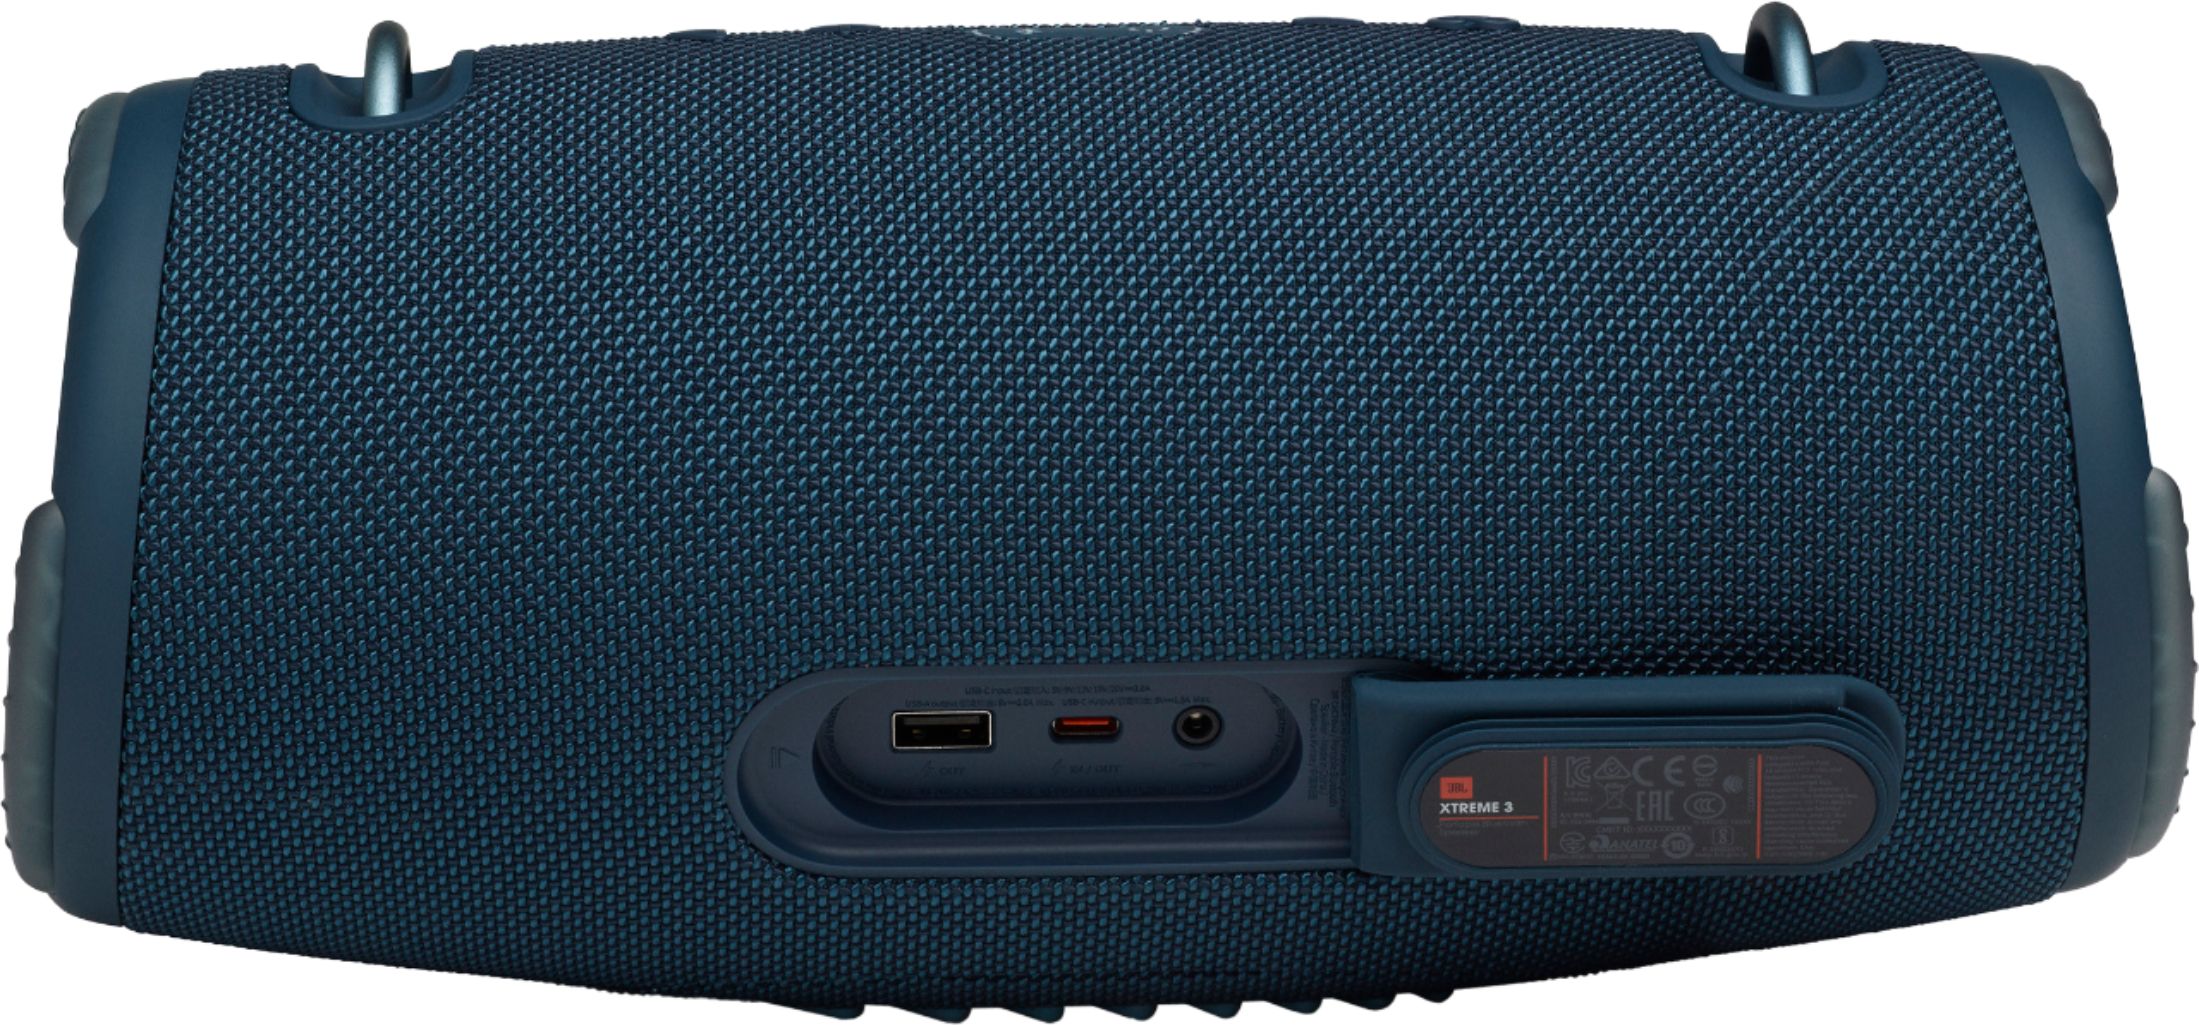 JBL Xtreme 3 Portable Bluetooth Speaker Review by HobbyDad 